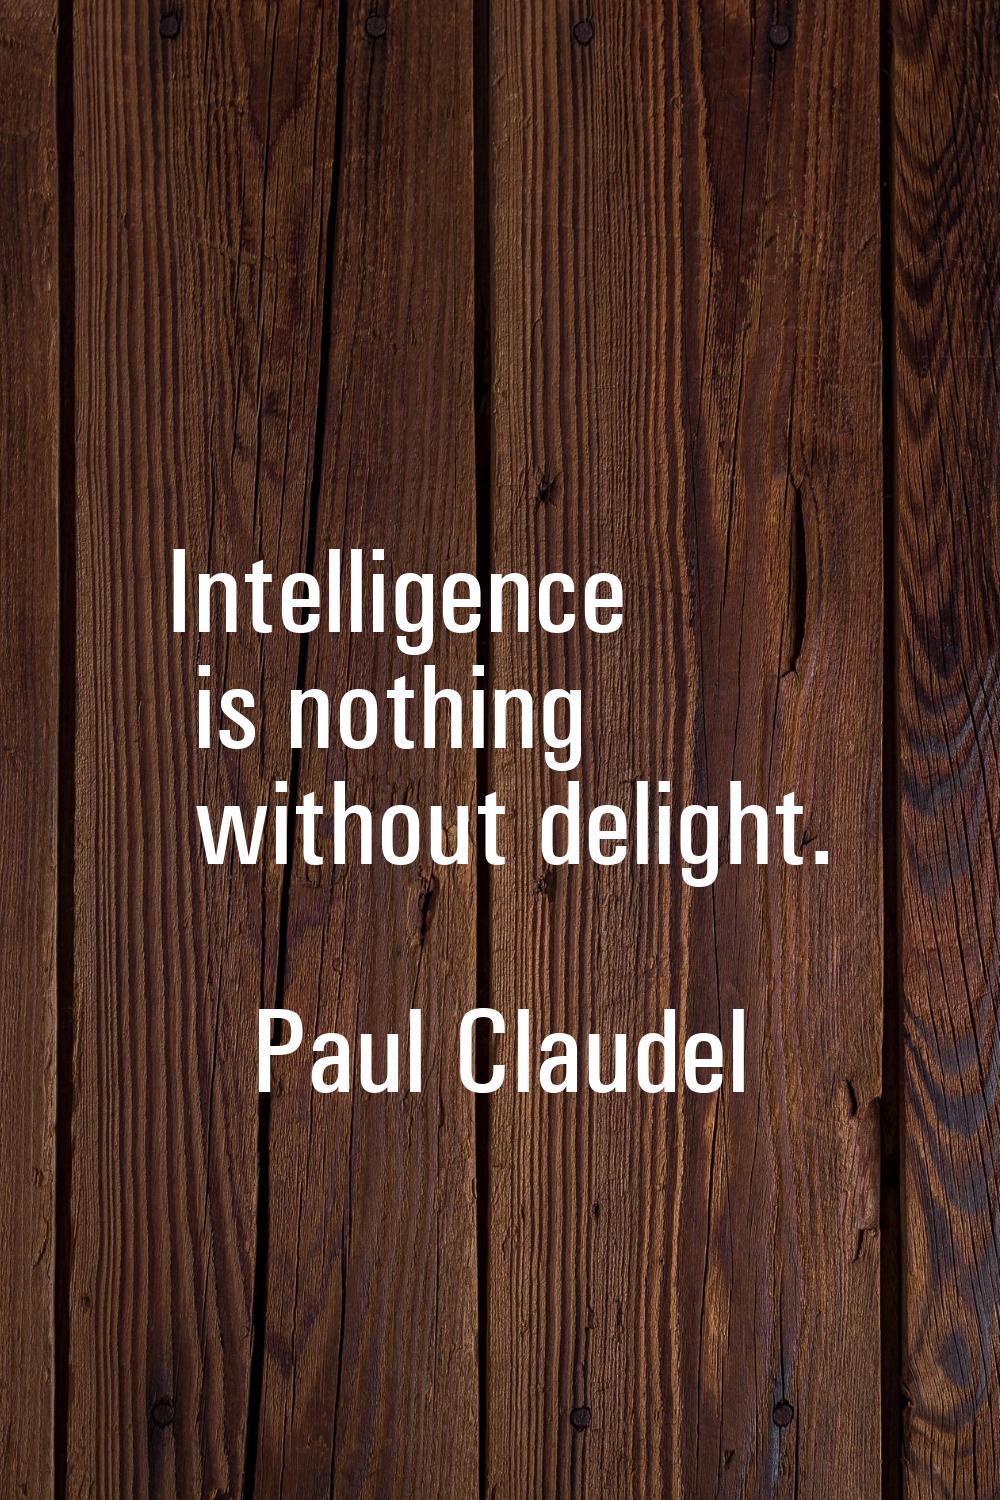 Intelligence is nothing without delight.